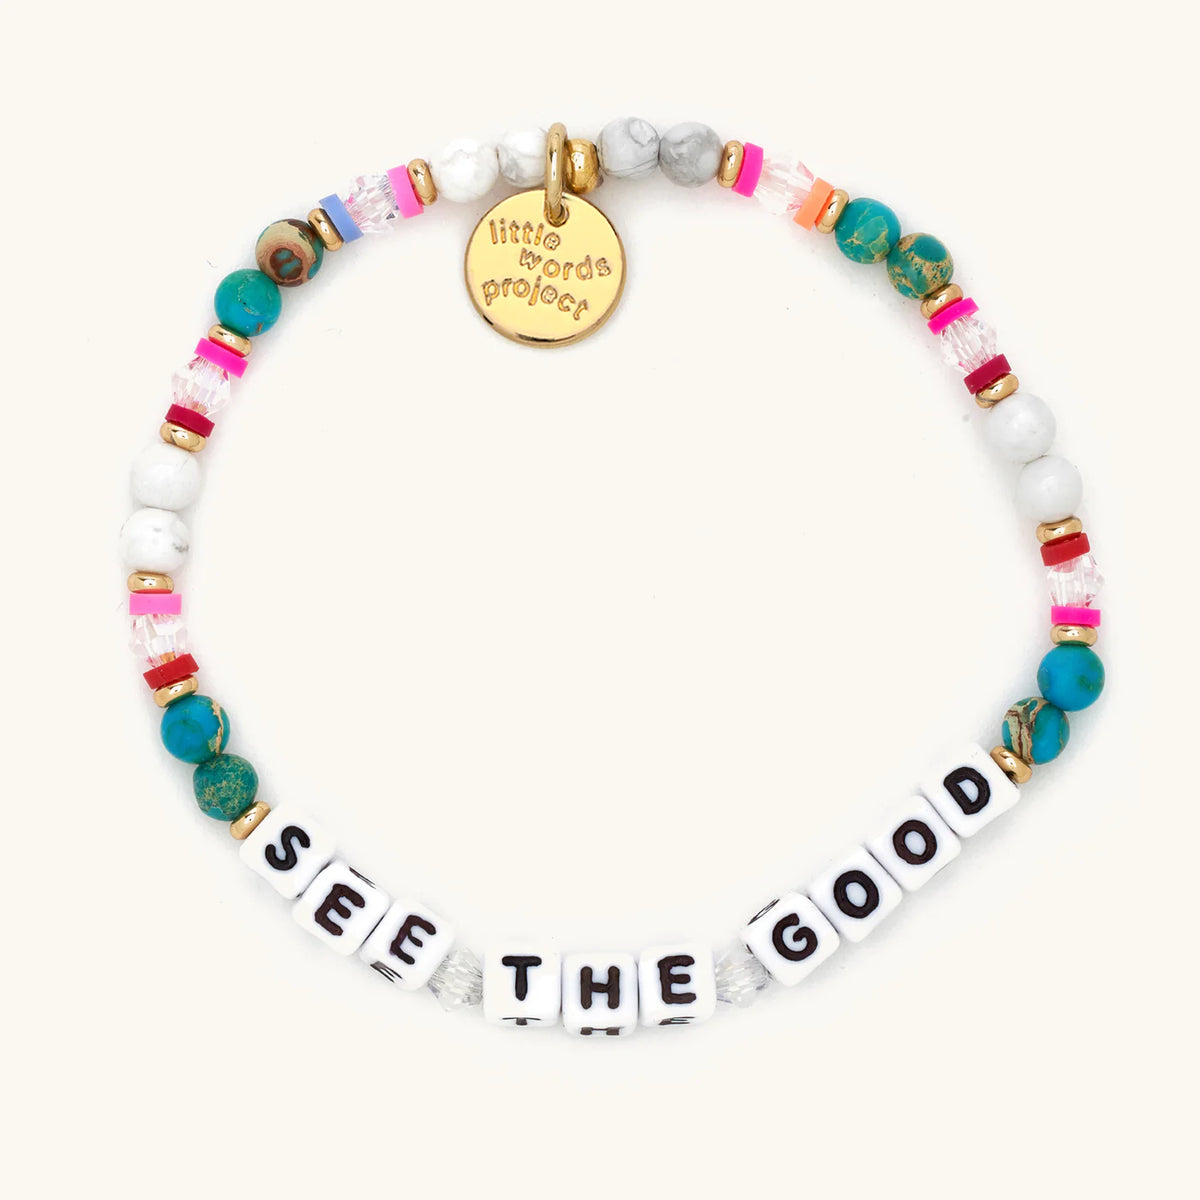 Little Words Project - See The Good